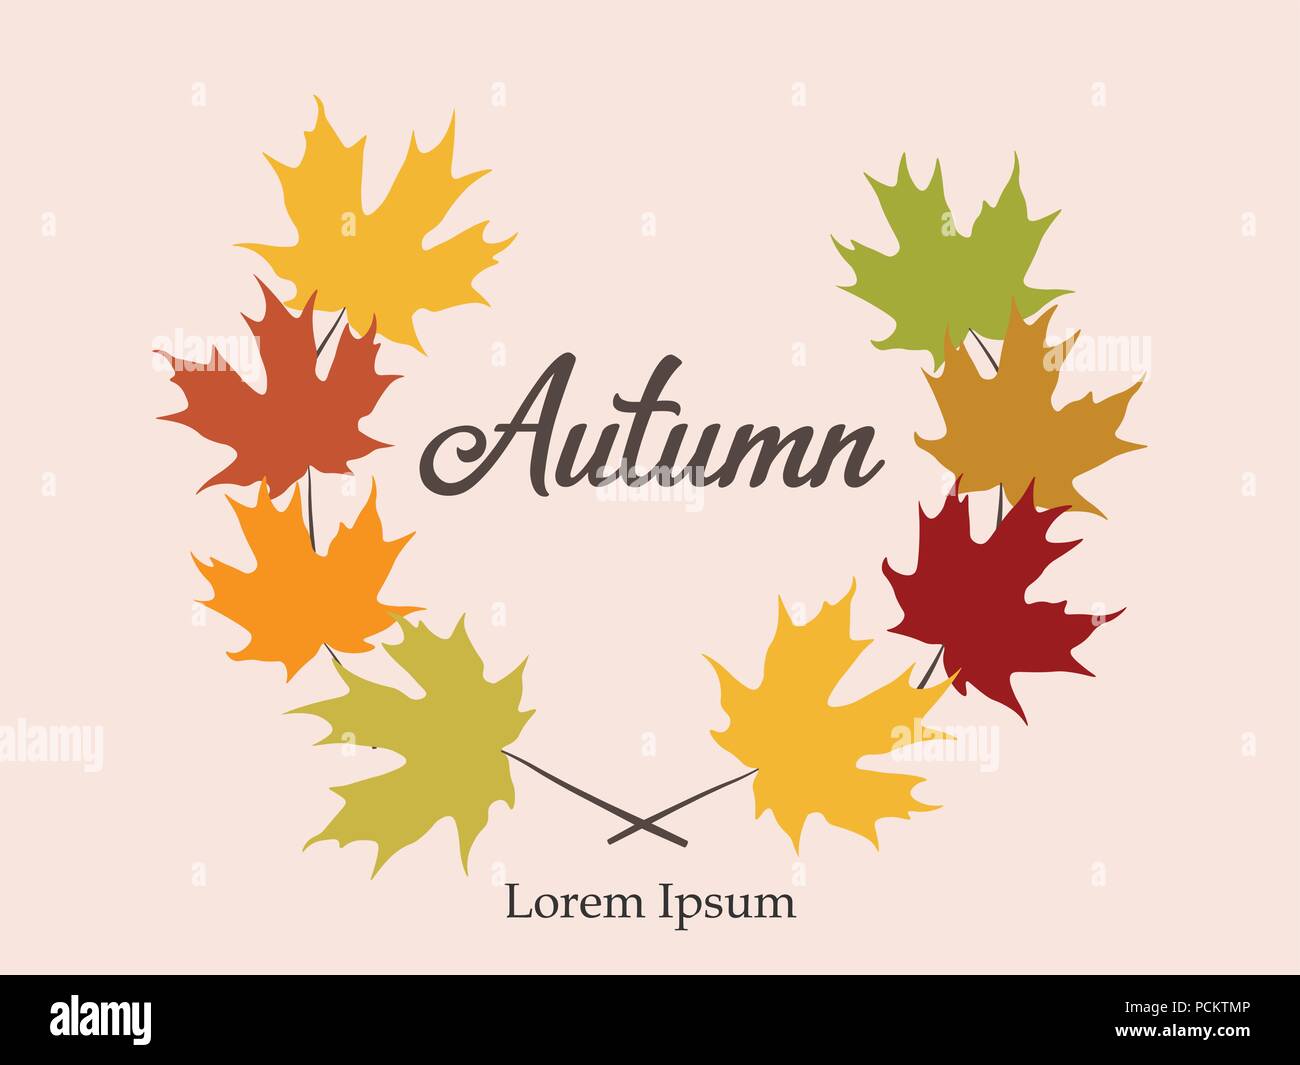 Autumn frame background. Wreath of autumn leaves. Multicolored maple, oak and ash  leves. Vector EPS 10 Stock Vector